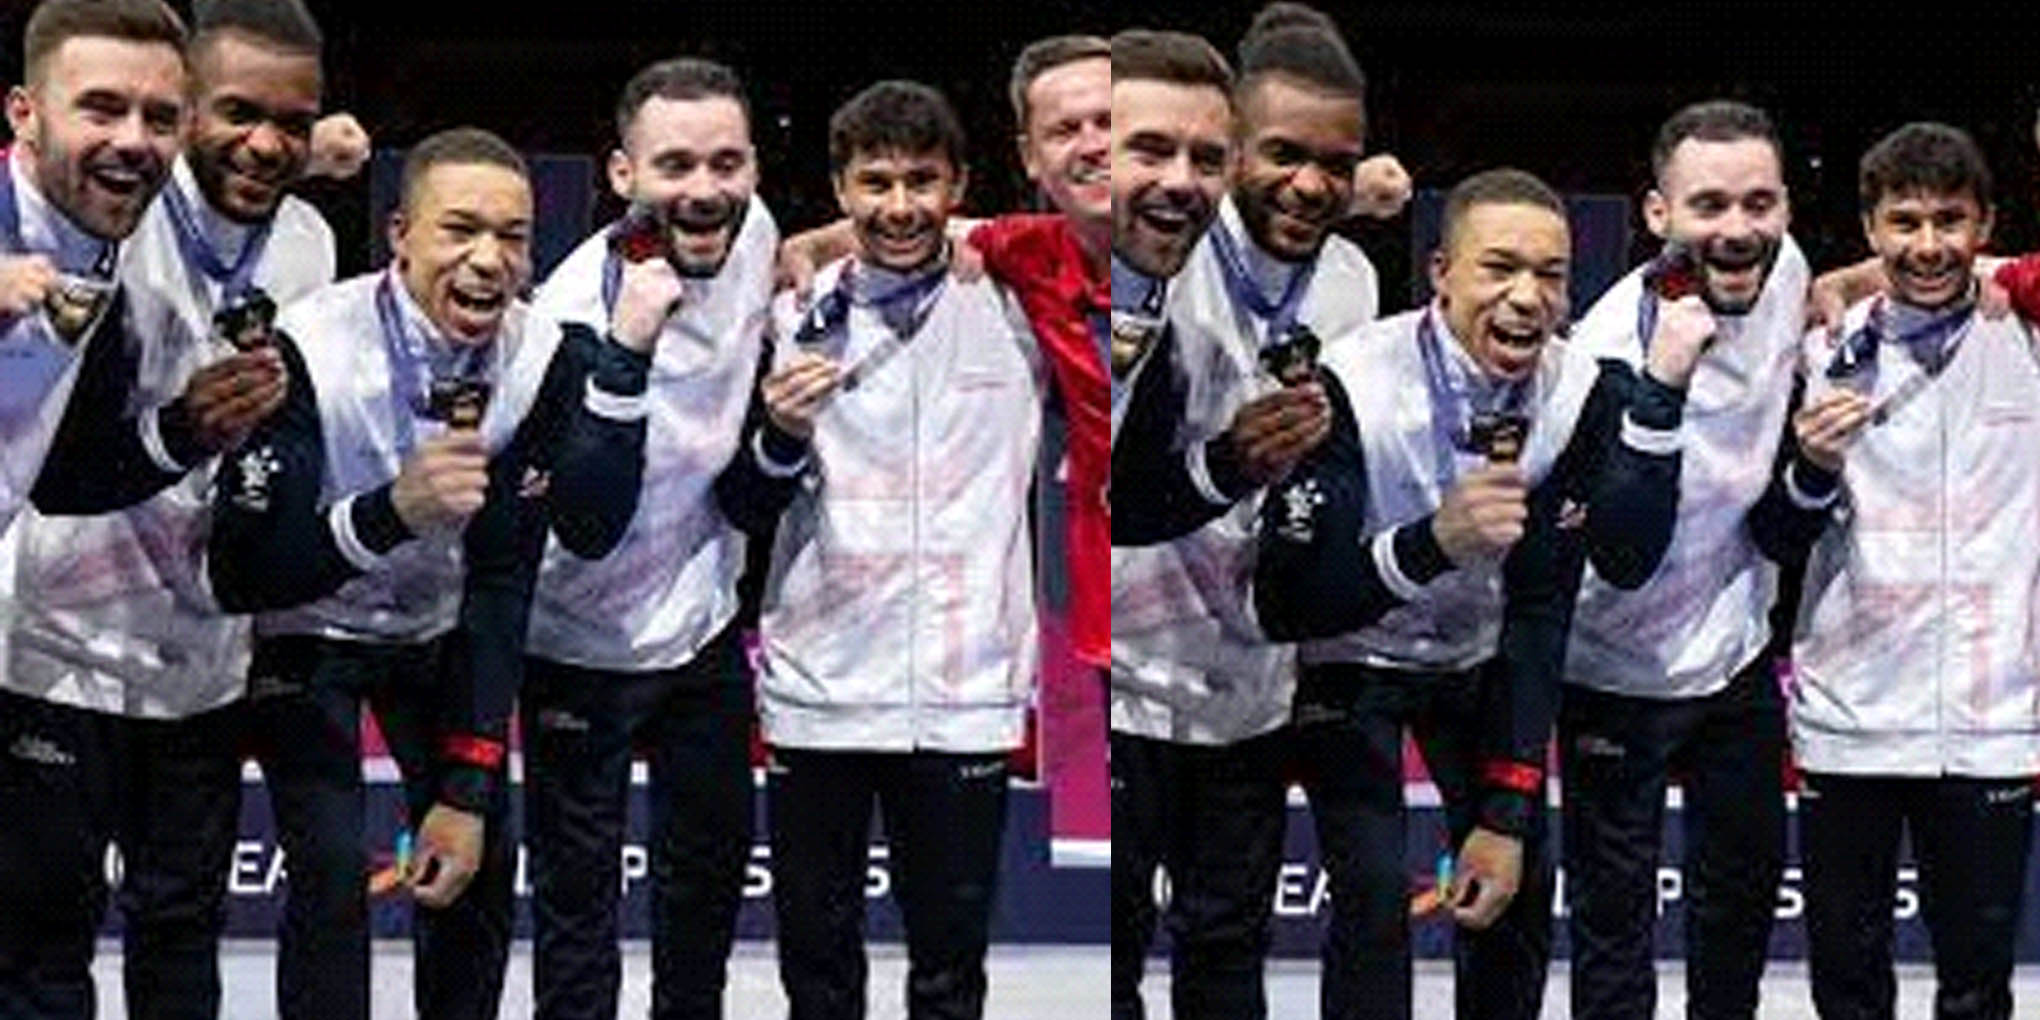 Great Britain's gymnasts win an incredible men's team gold in the 2022 European Championships in Munich.